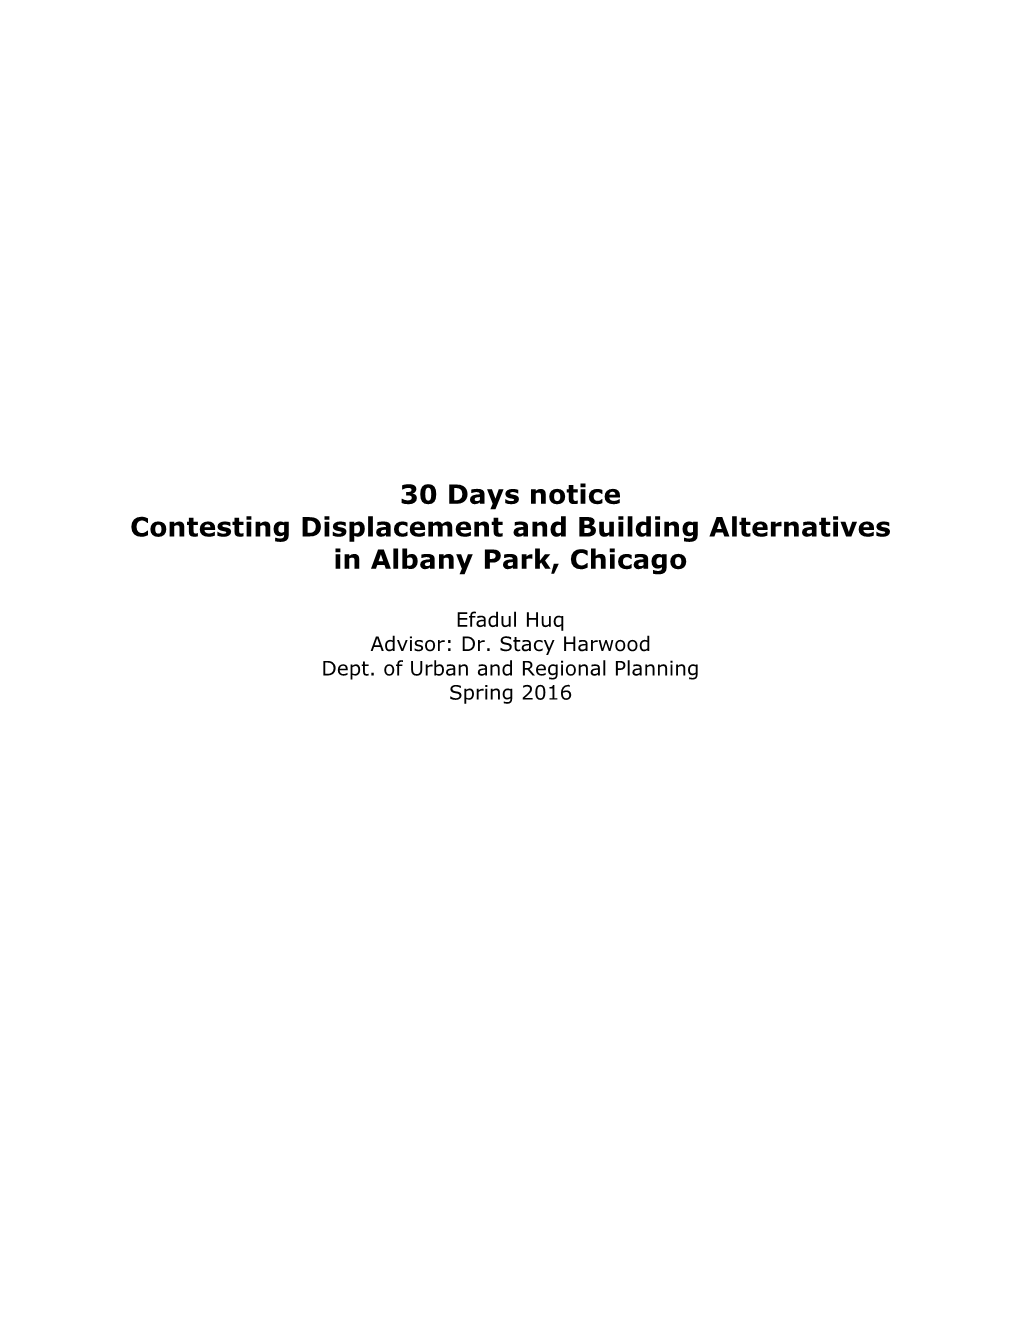 30 Days Notice Contesting Displacement and Building Alternatives in Albany Park, Chicago